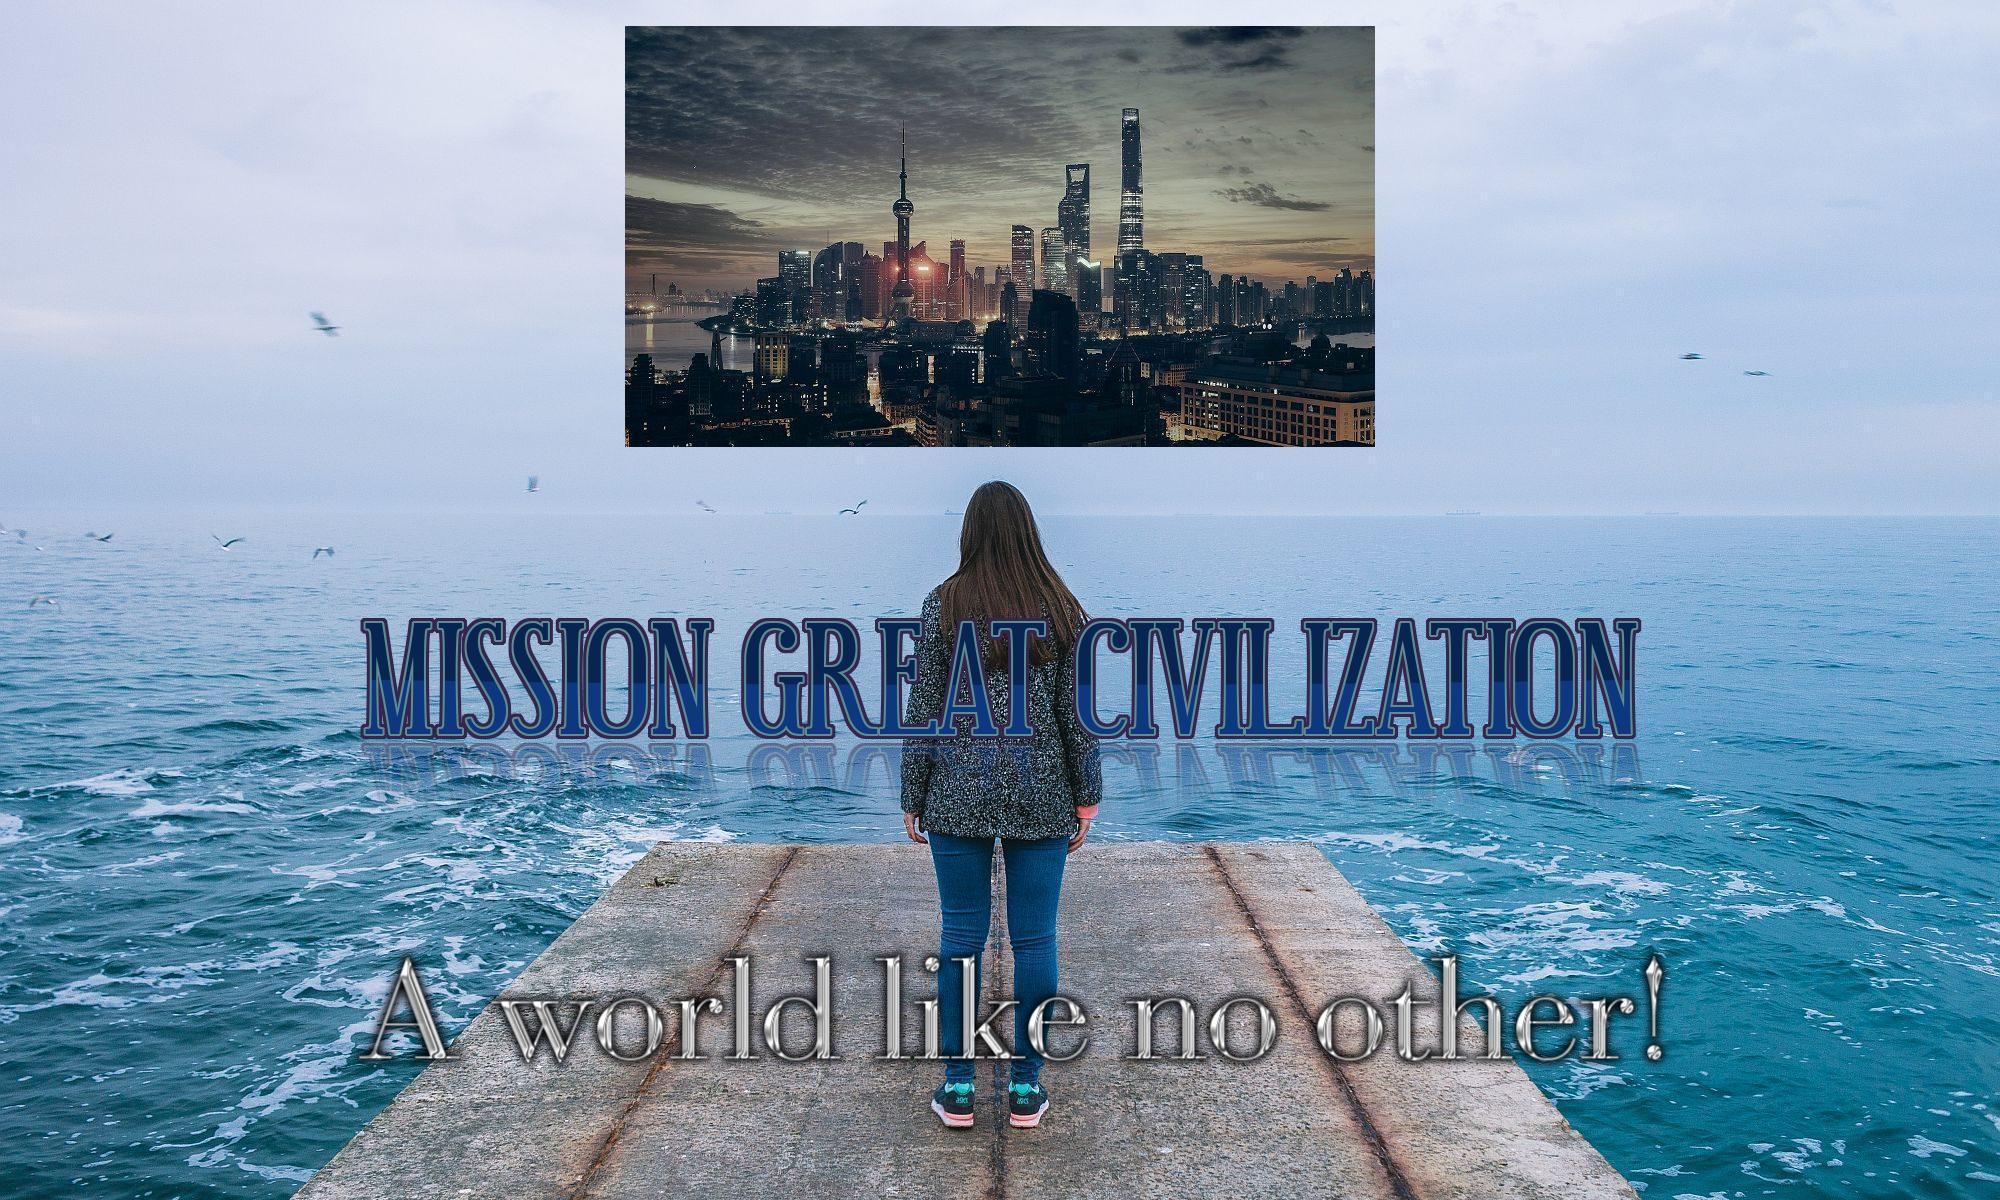 GLOBAL OUTREACH Mission Great Civilization